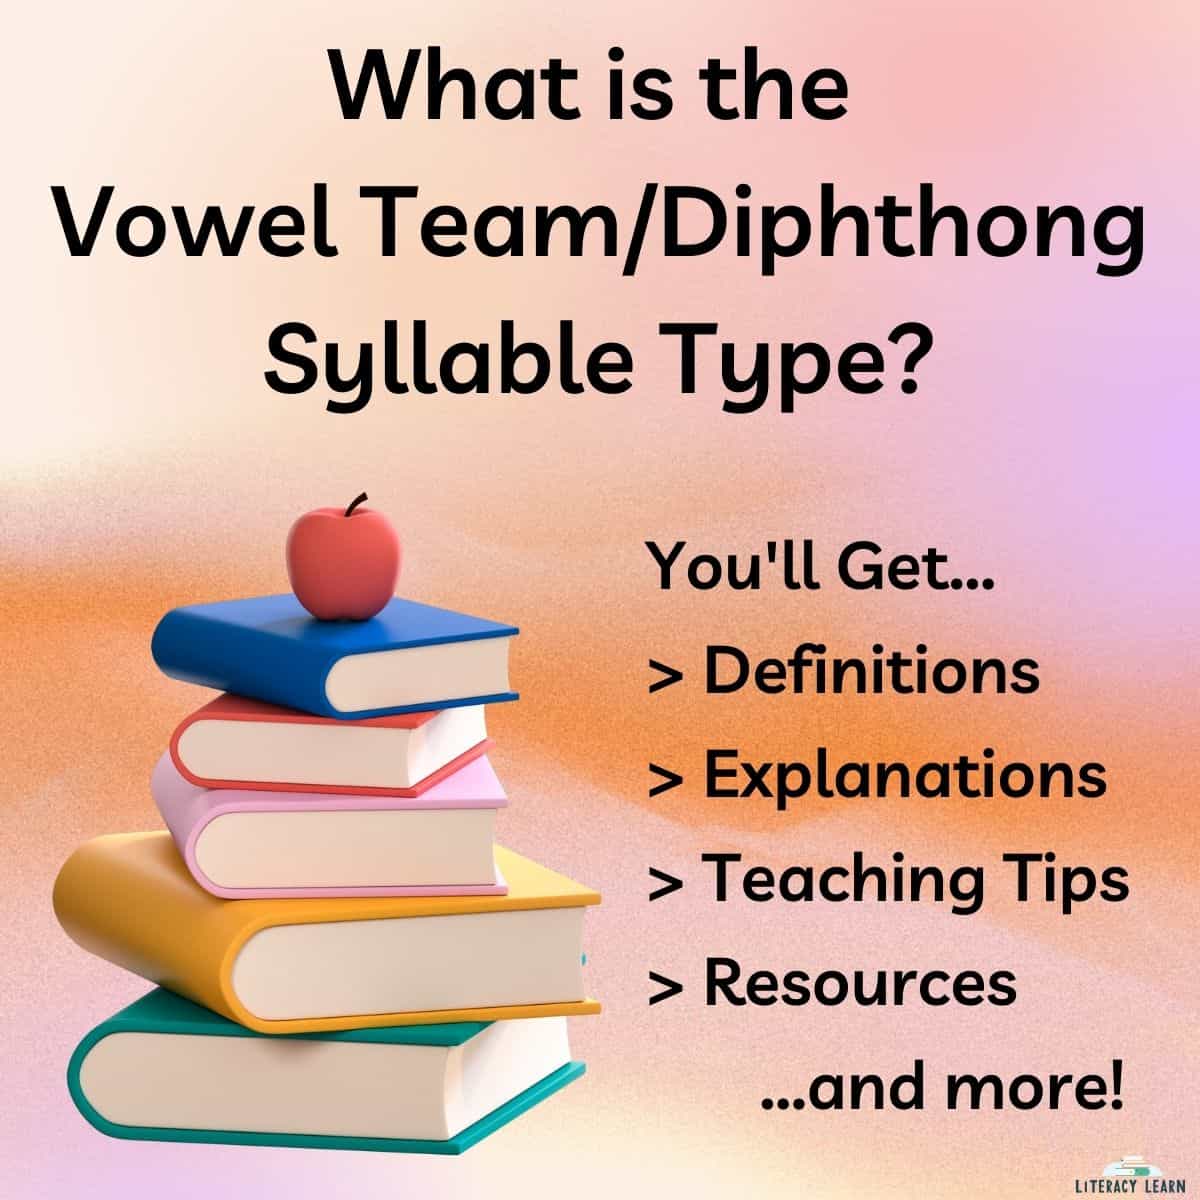 Colorful background with a pile of books and title "What is the Vowel Team/Diphthong Syllable Type?"